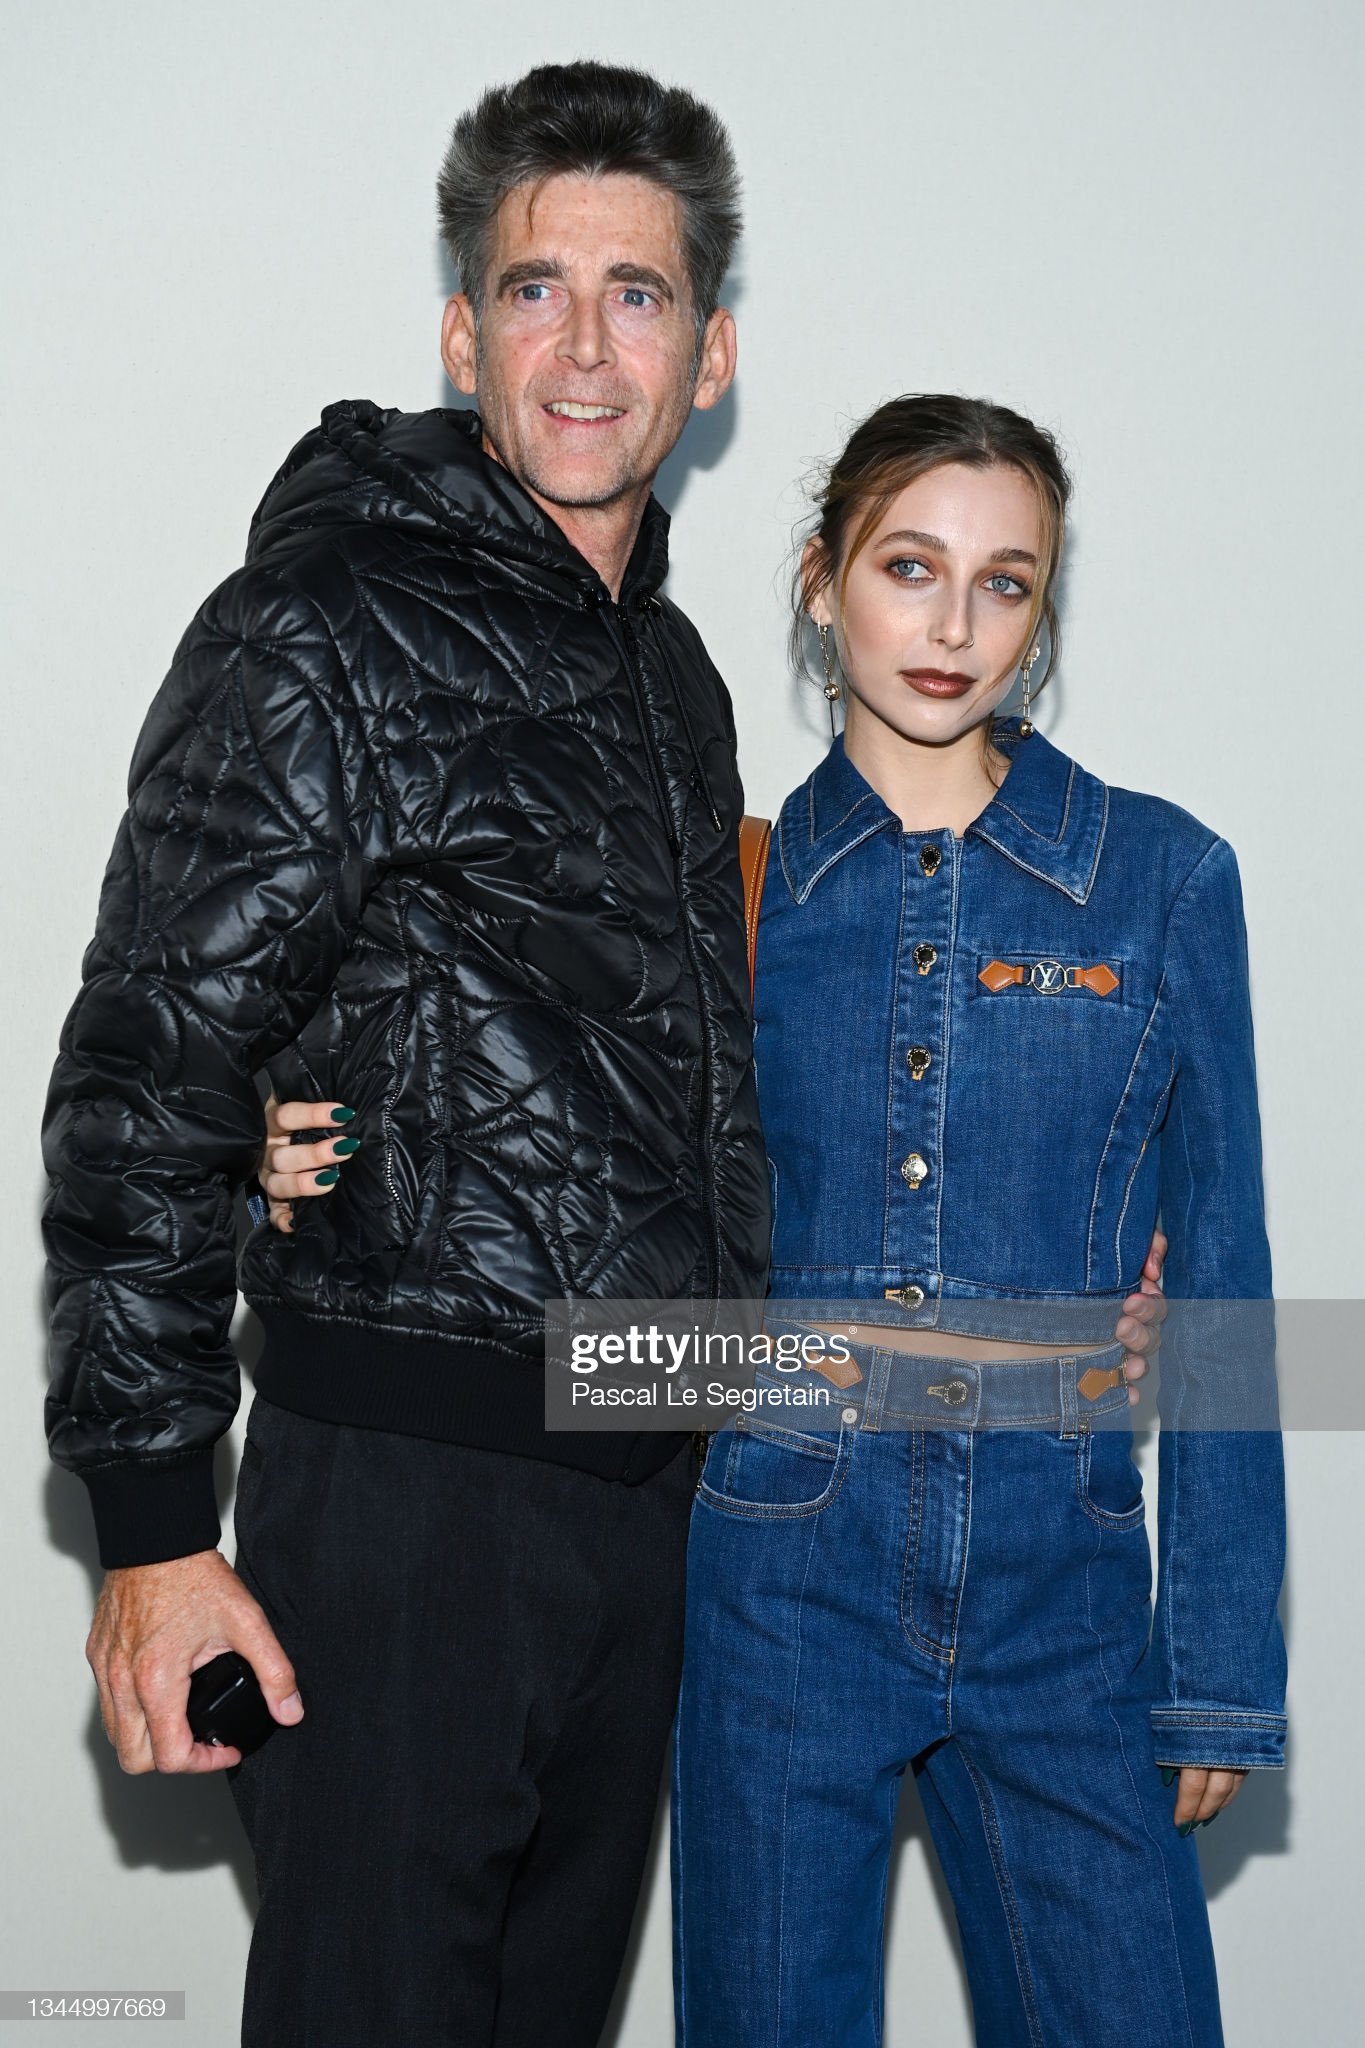 sally on Twitter: "emma and her dad at the vuitton show in paris https://t.co/65CidKagKr" / Twitter